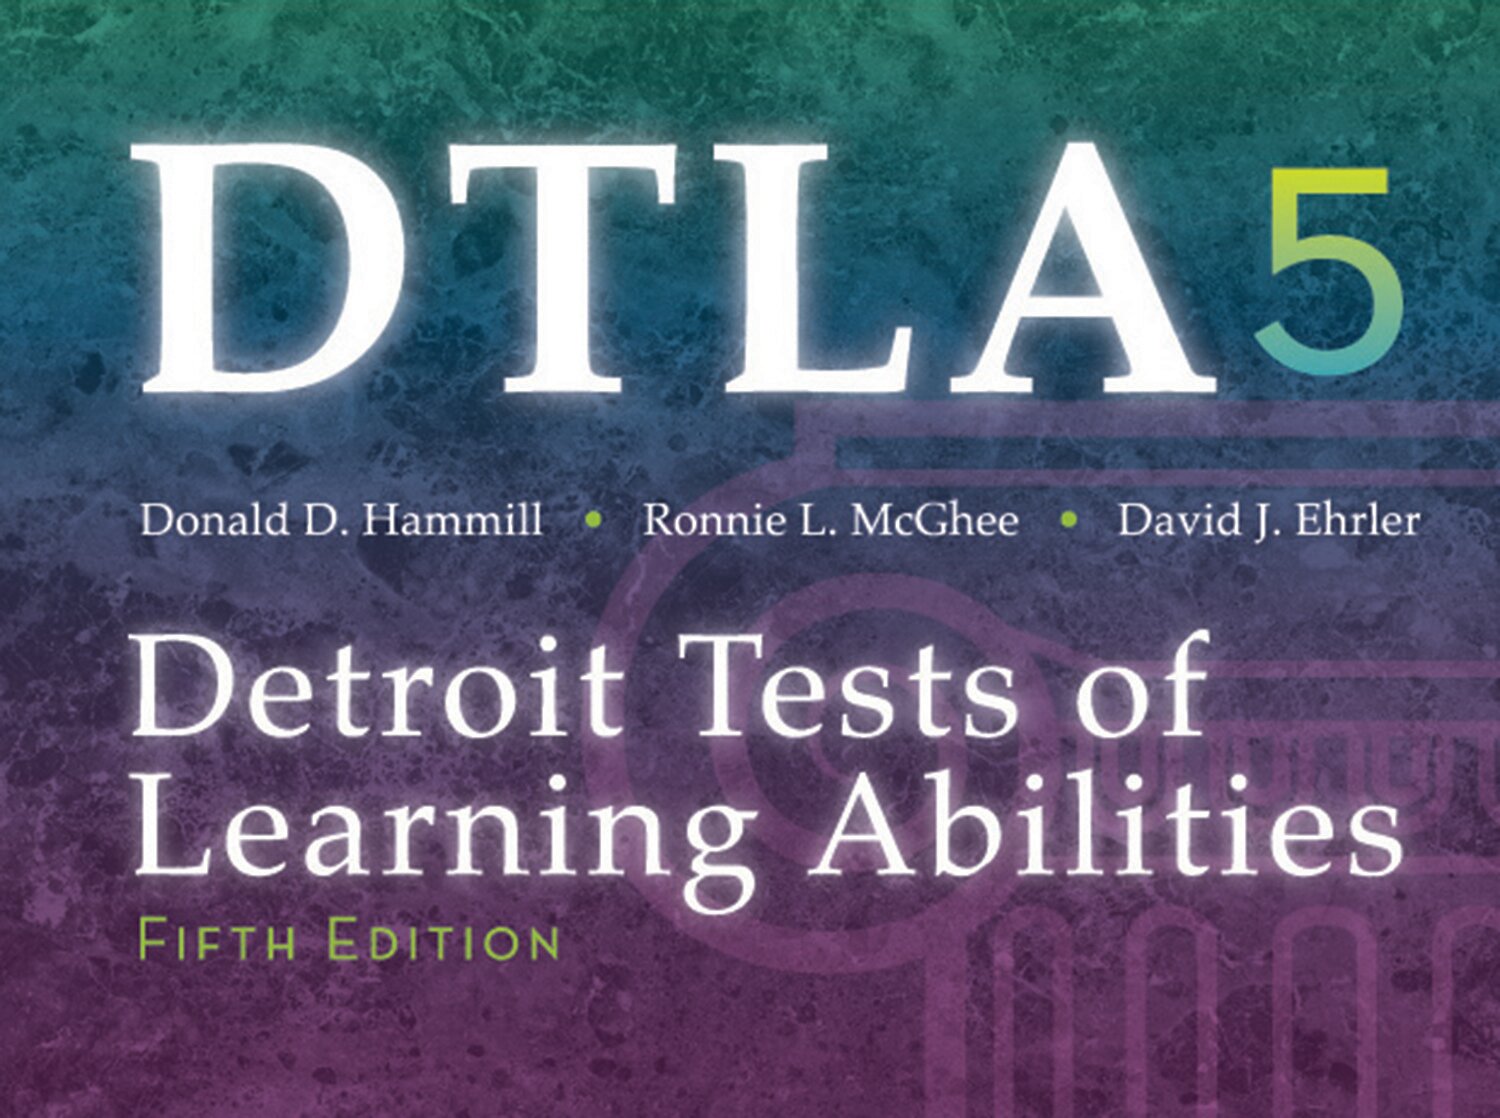 detroit-tests-of-learning-abilities-fifth-edition-dtla-5